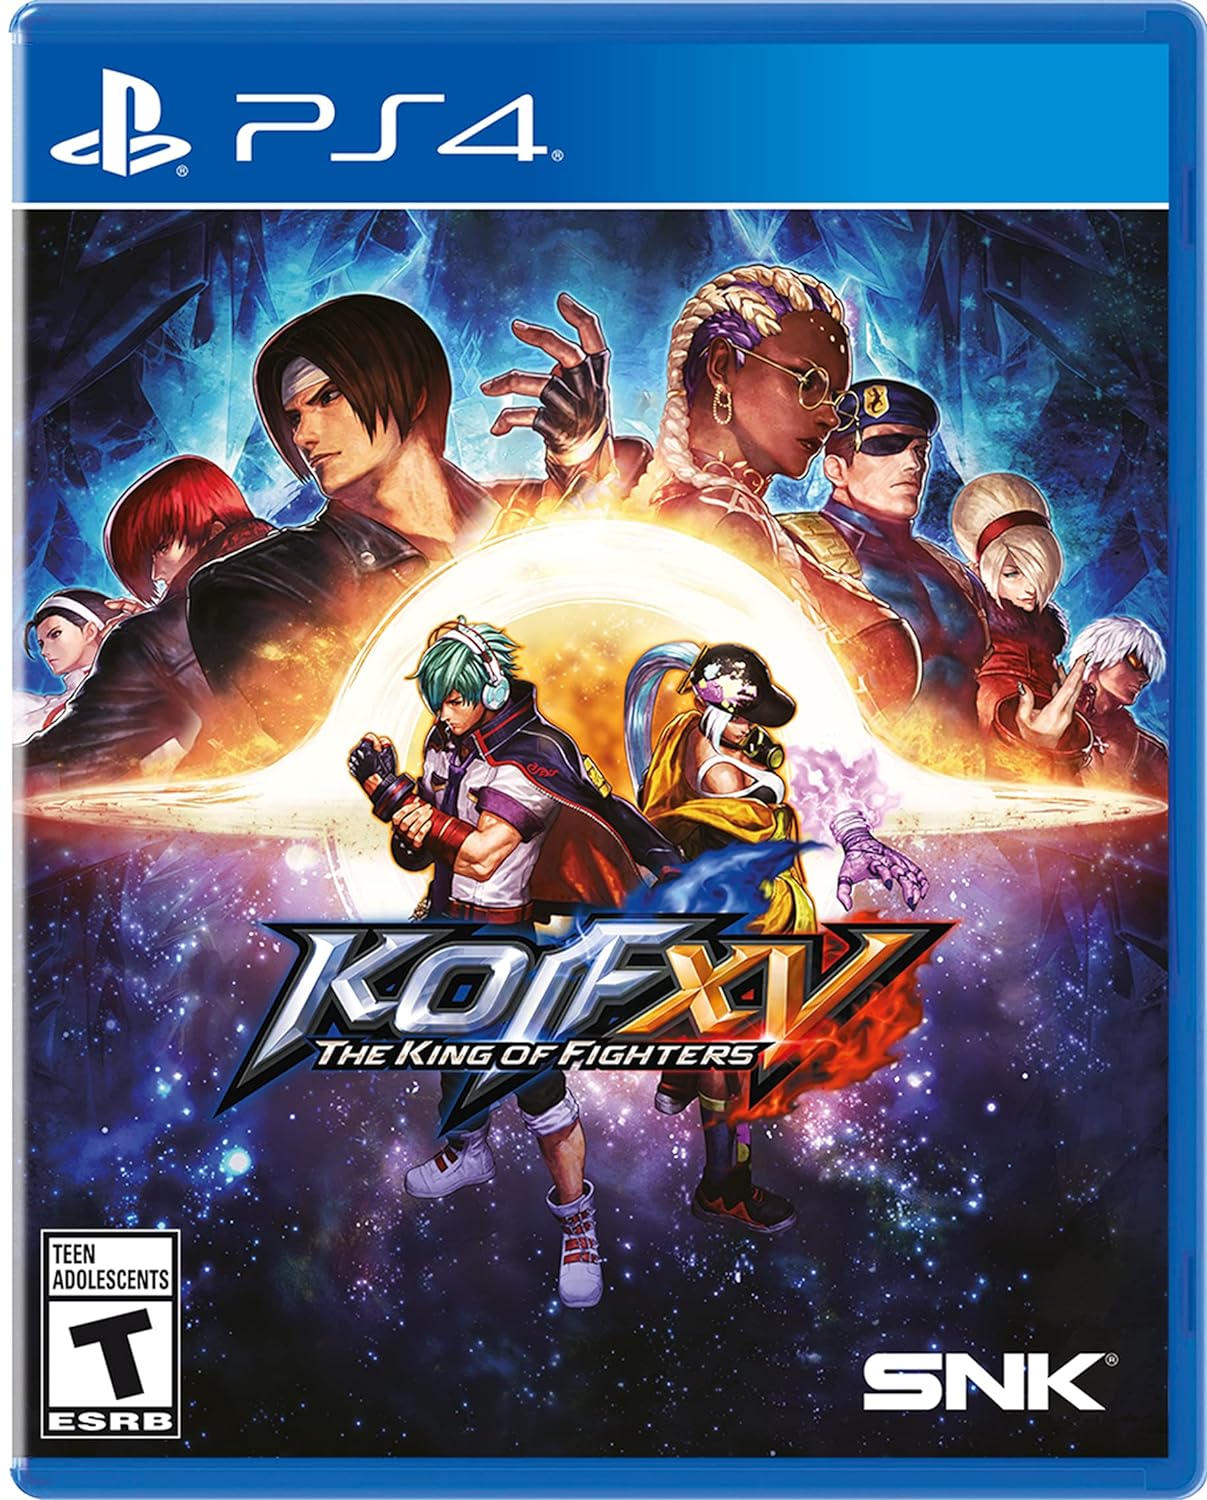 The King of Fighters XV (KOF 15)